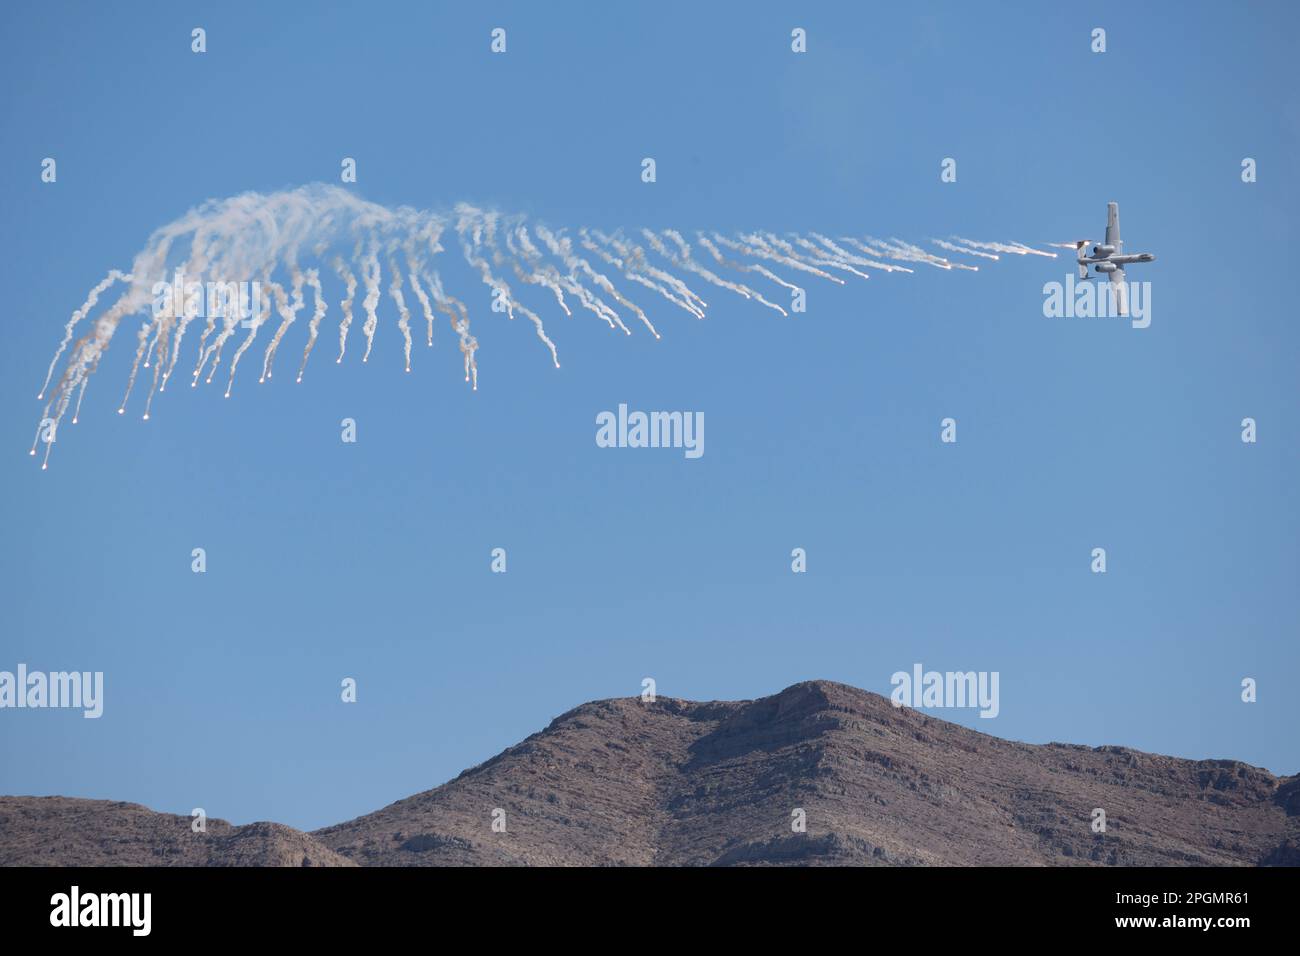 Las Vegas, NV - November 6, 2022: A-10 Warthog Attack Jet Drops Flares During a Demo at the Aviation Nation airshow at Nellis AFB. Stock Photo